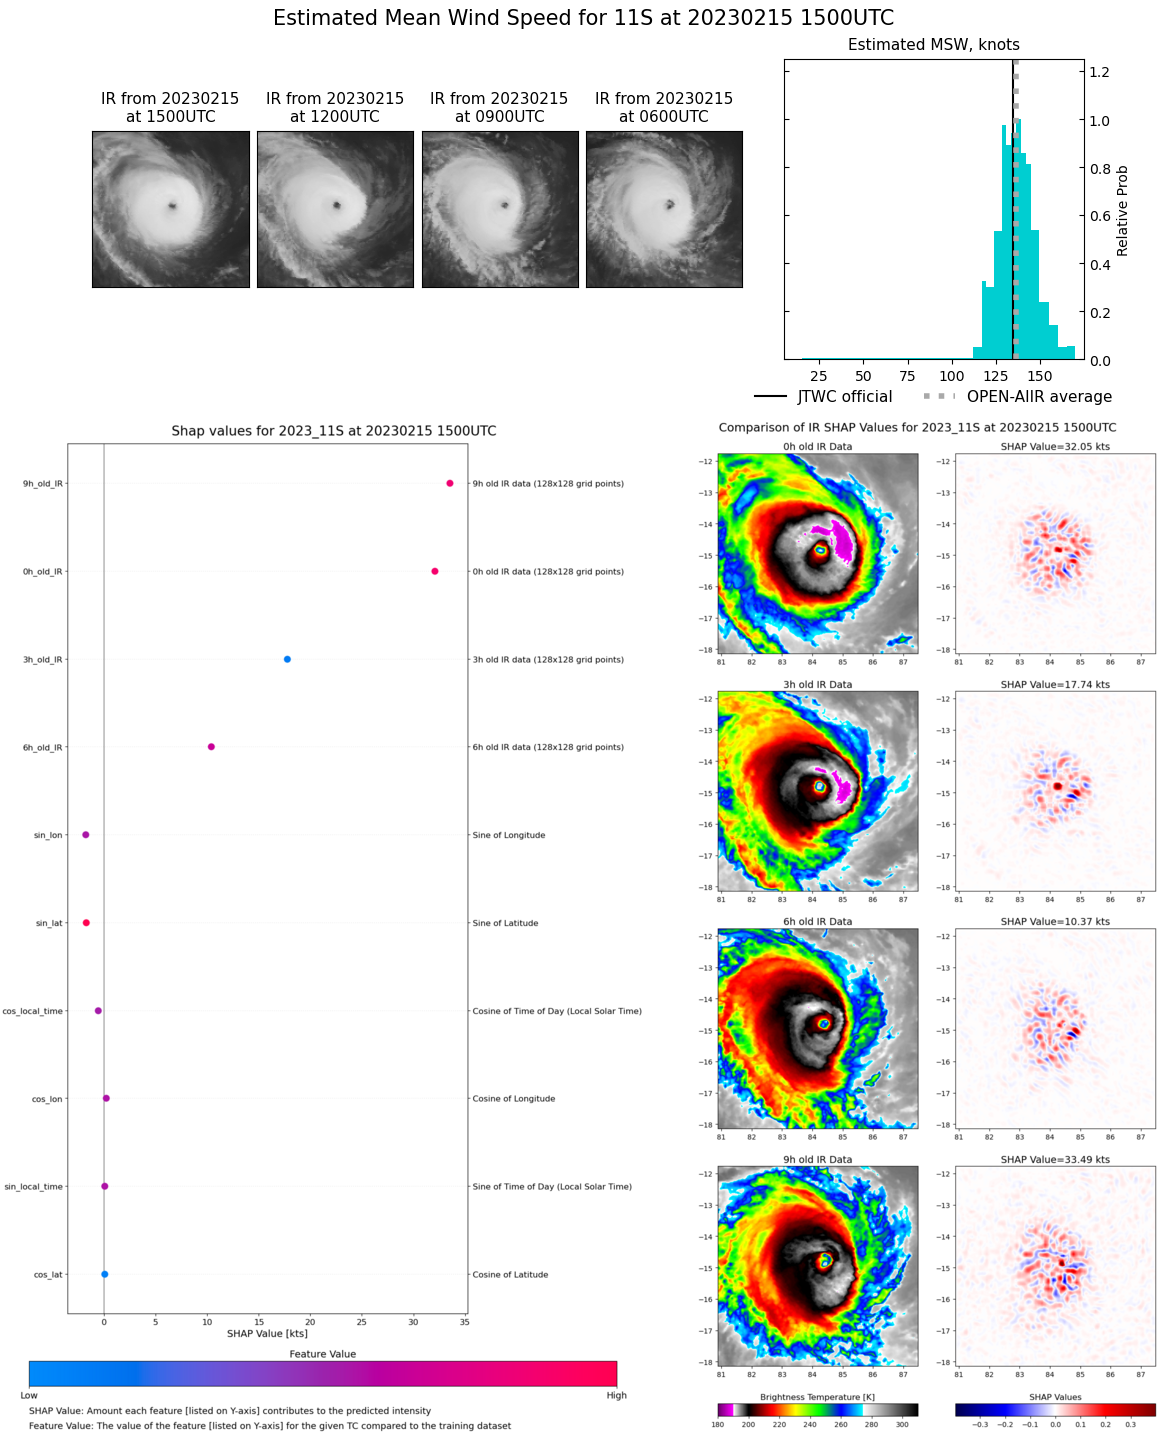 SATELLITE ANALYSIS, INITIAL POSITION AND INTENSITY DISCUSSION: ANIMATED MULTISPECTRAL SATELLITE IMAGERY (MSI) AND A 151256Z SSMIS 91GHZ IMAGE DEPICT A VERY WELL ORGANIZED SYSTEM WITH A 13 NM DIAMETER EYE. THERE IS EVIDENCE OF PRESSURE ON THE EASTERN PERIPHERY AS THE SYSTEM IS TRACKING UNDER AN AREA OF WESTWARD UPPER-LEVEL WIND FLOW ESTIMATED AT 35-40 KNOTS. ENVIRONMENTAL ANALYSIS INDICATES TC 11S TO BE IN MARGINALLY FAVORABLE CONDITIONS FOR CONTINUAL TROPICAL DEVELOPMENT. THESE CONDITIONS ARE CHARACTERIZED BY THE AFOREMENTIONED OUTFLOW ALOFT, MODERATE (15-20 KTS) VERTICAL WIND SHEAR (VWS), A VERY STRONG 850 MB VORTICITY SIGNATURE, AND WARM (27-28 C) SEA SURFACE TEMPERATURES (SST). THE INITIAL POSITION IS PLACED WITH HIGH CONFIDENCE BASED ON THE ABOVE MENTIONED MSI AND MICROWAVE IMAGERY. THE INITIAL INTENSITY OF 135 KTS IS ASSESSED WITH MEDIUM CONFIDENCE BASED ON A BLEND OF MULTI-AGENCY AND AUTOMATED DVORAK ESTIMATES.